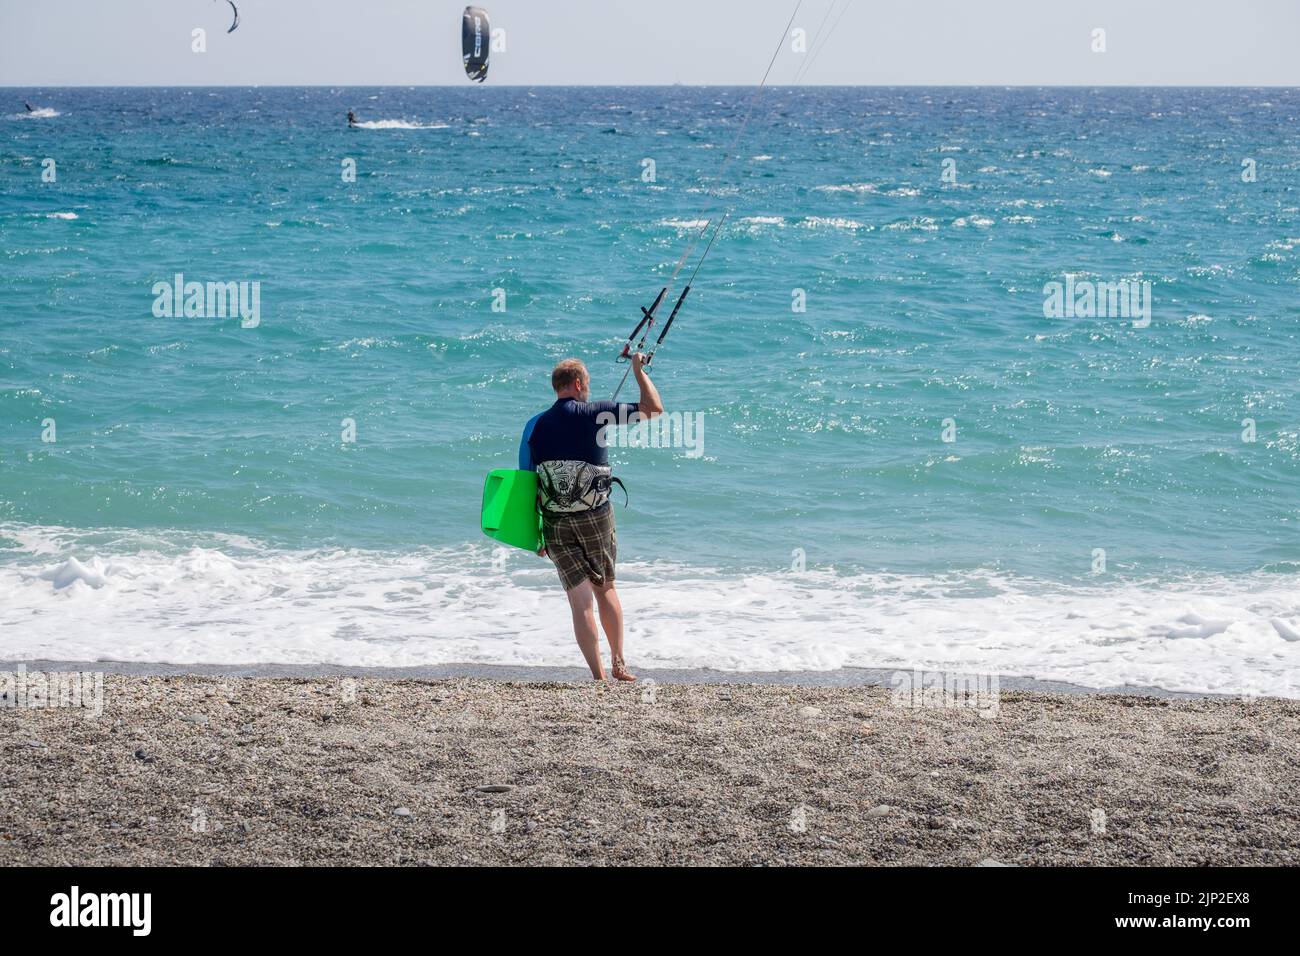 Kitesurfer holding the kite from the control bar Stock Photo